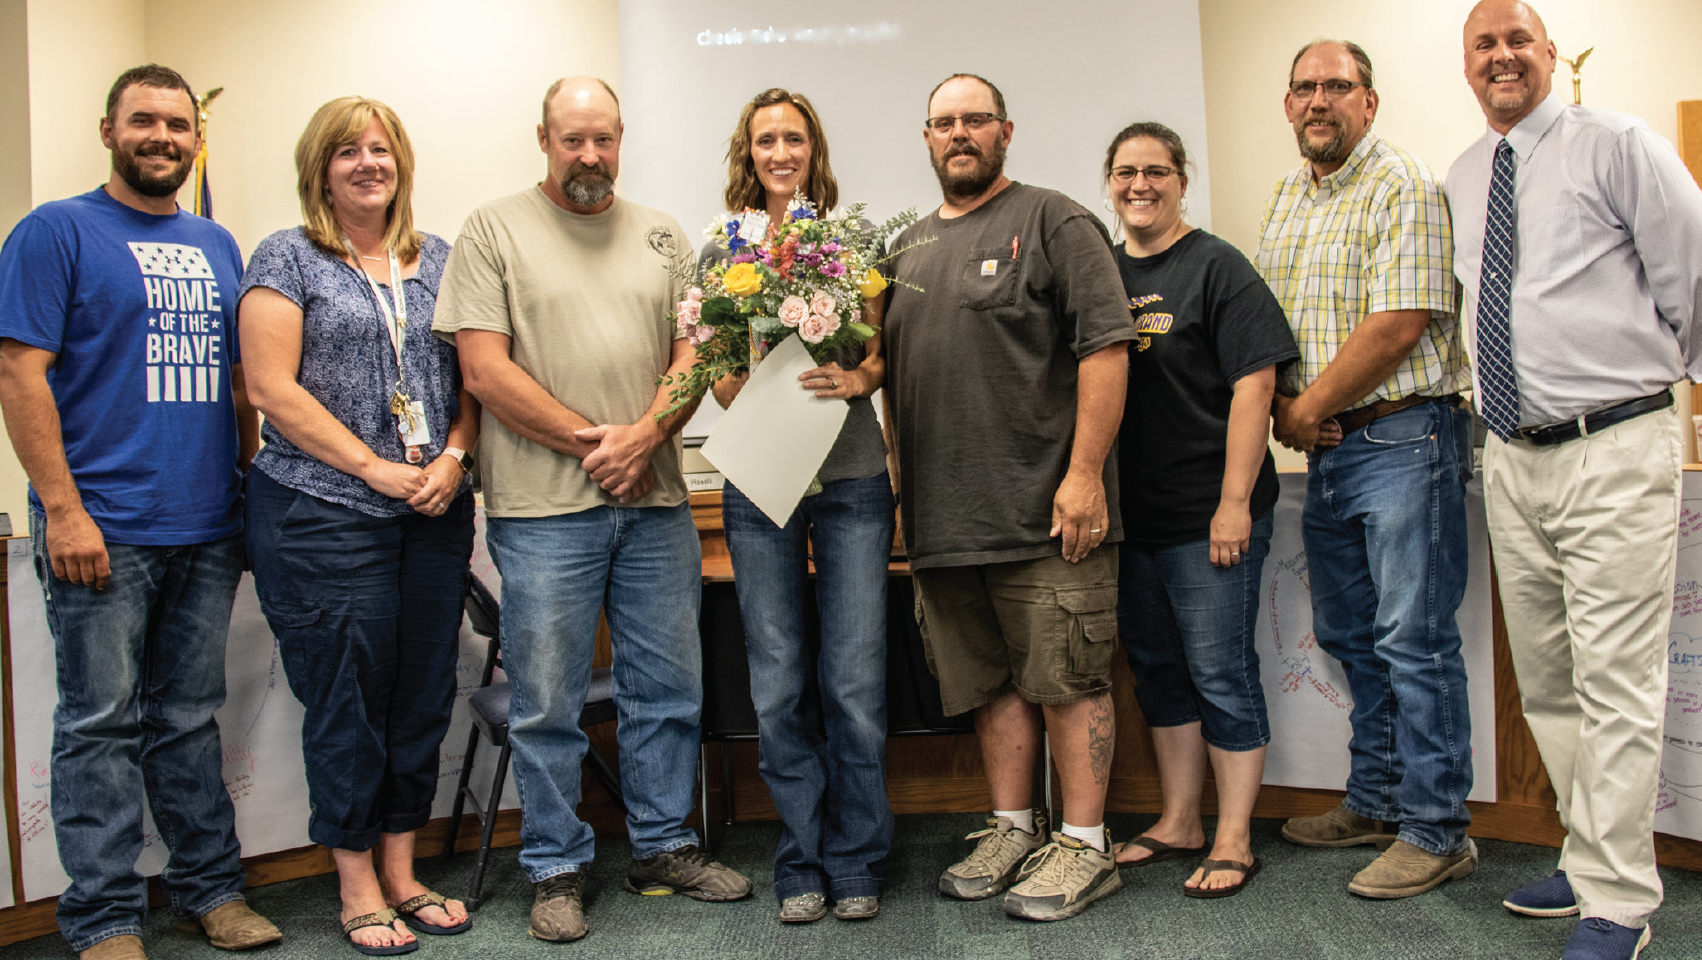 photo by Kim Cameron The West Grand School Board recognized Nellie Thomson at Tuesday's board meeting. (L to R) Mitch Lockhart, Michele DeSanti, Shorty Lemon, Nellie Thomson, Jeremy Bock, Jessica Smiley, Travis Hoesli and Superintendent Darrin Peppard.